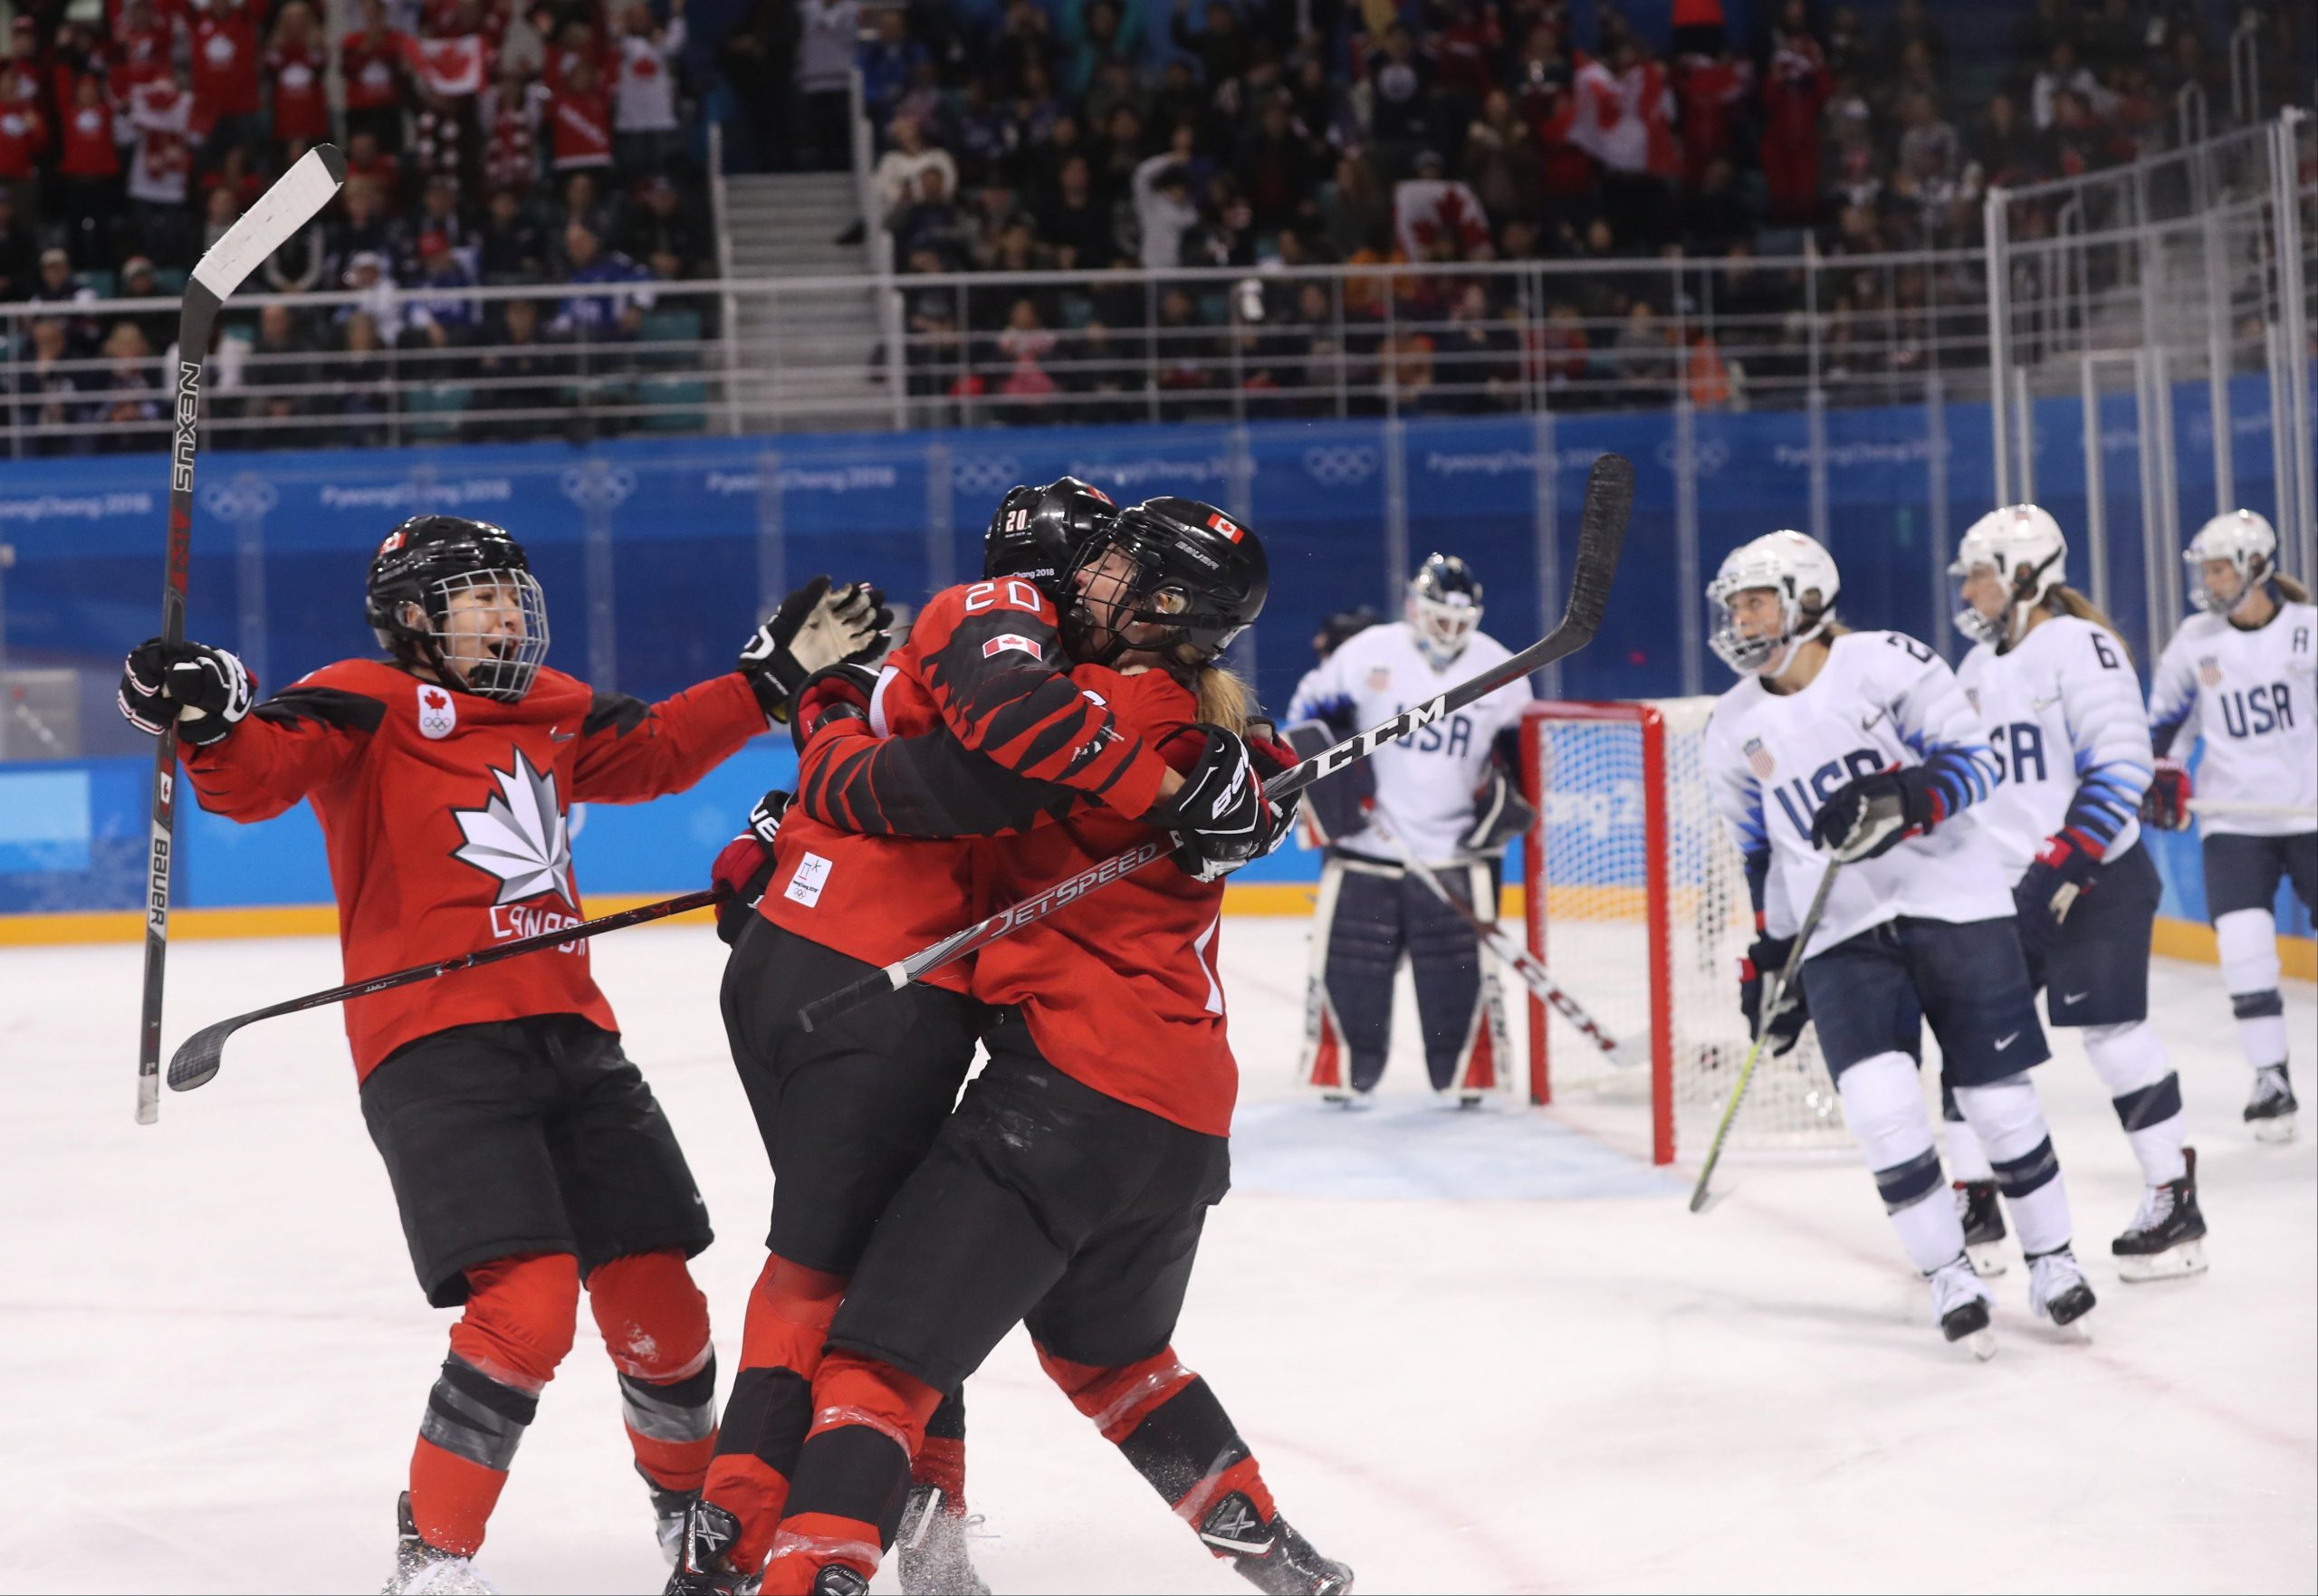 Nova Scotia plans to allow limited crowds at women's world hockey